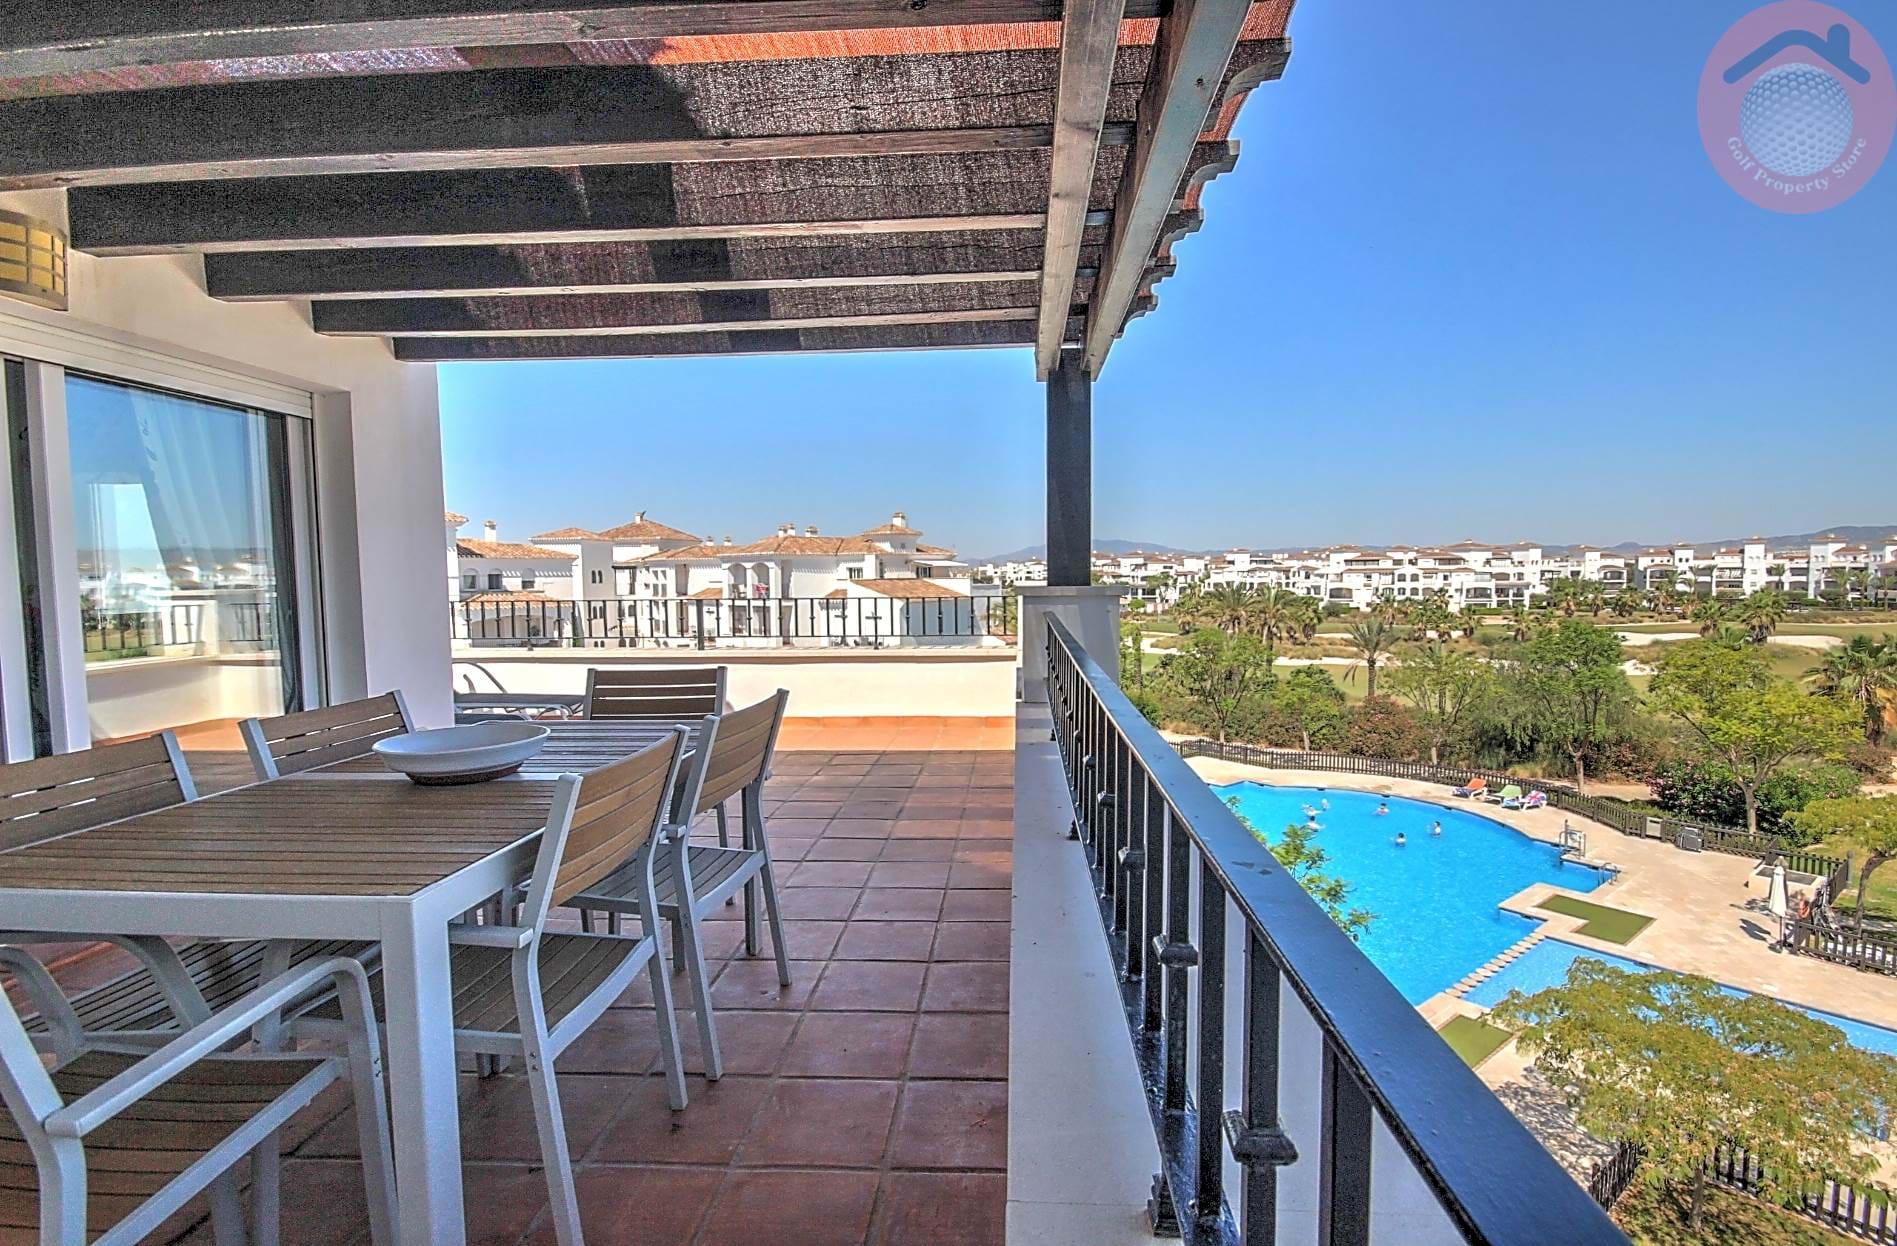 LA TORRE GOLF RESORT  PENTHOUSE WITH AMAZING VIEWS OF POOL AND GOLF